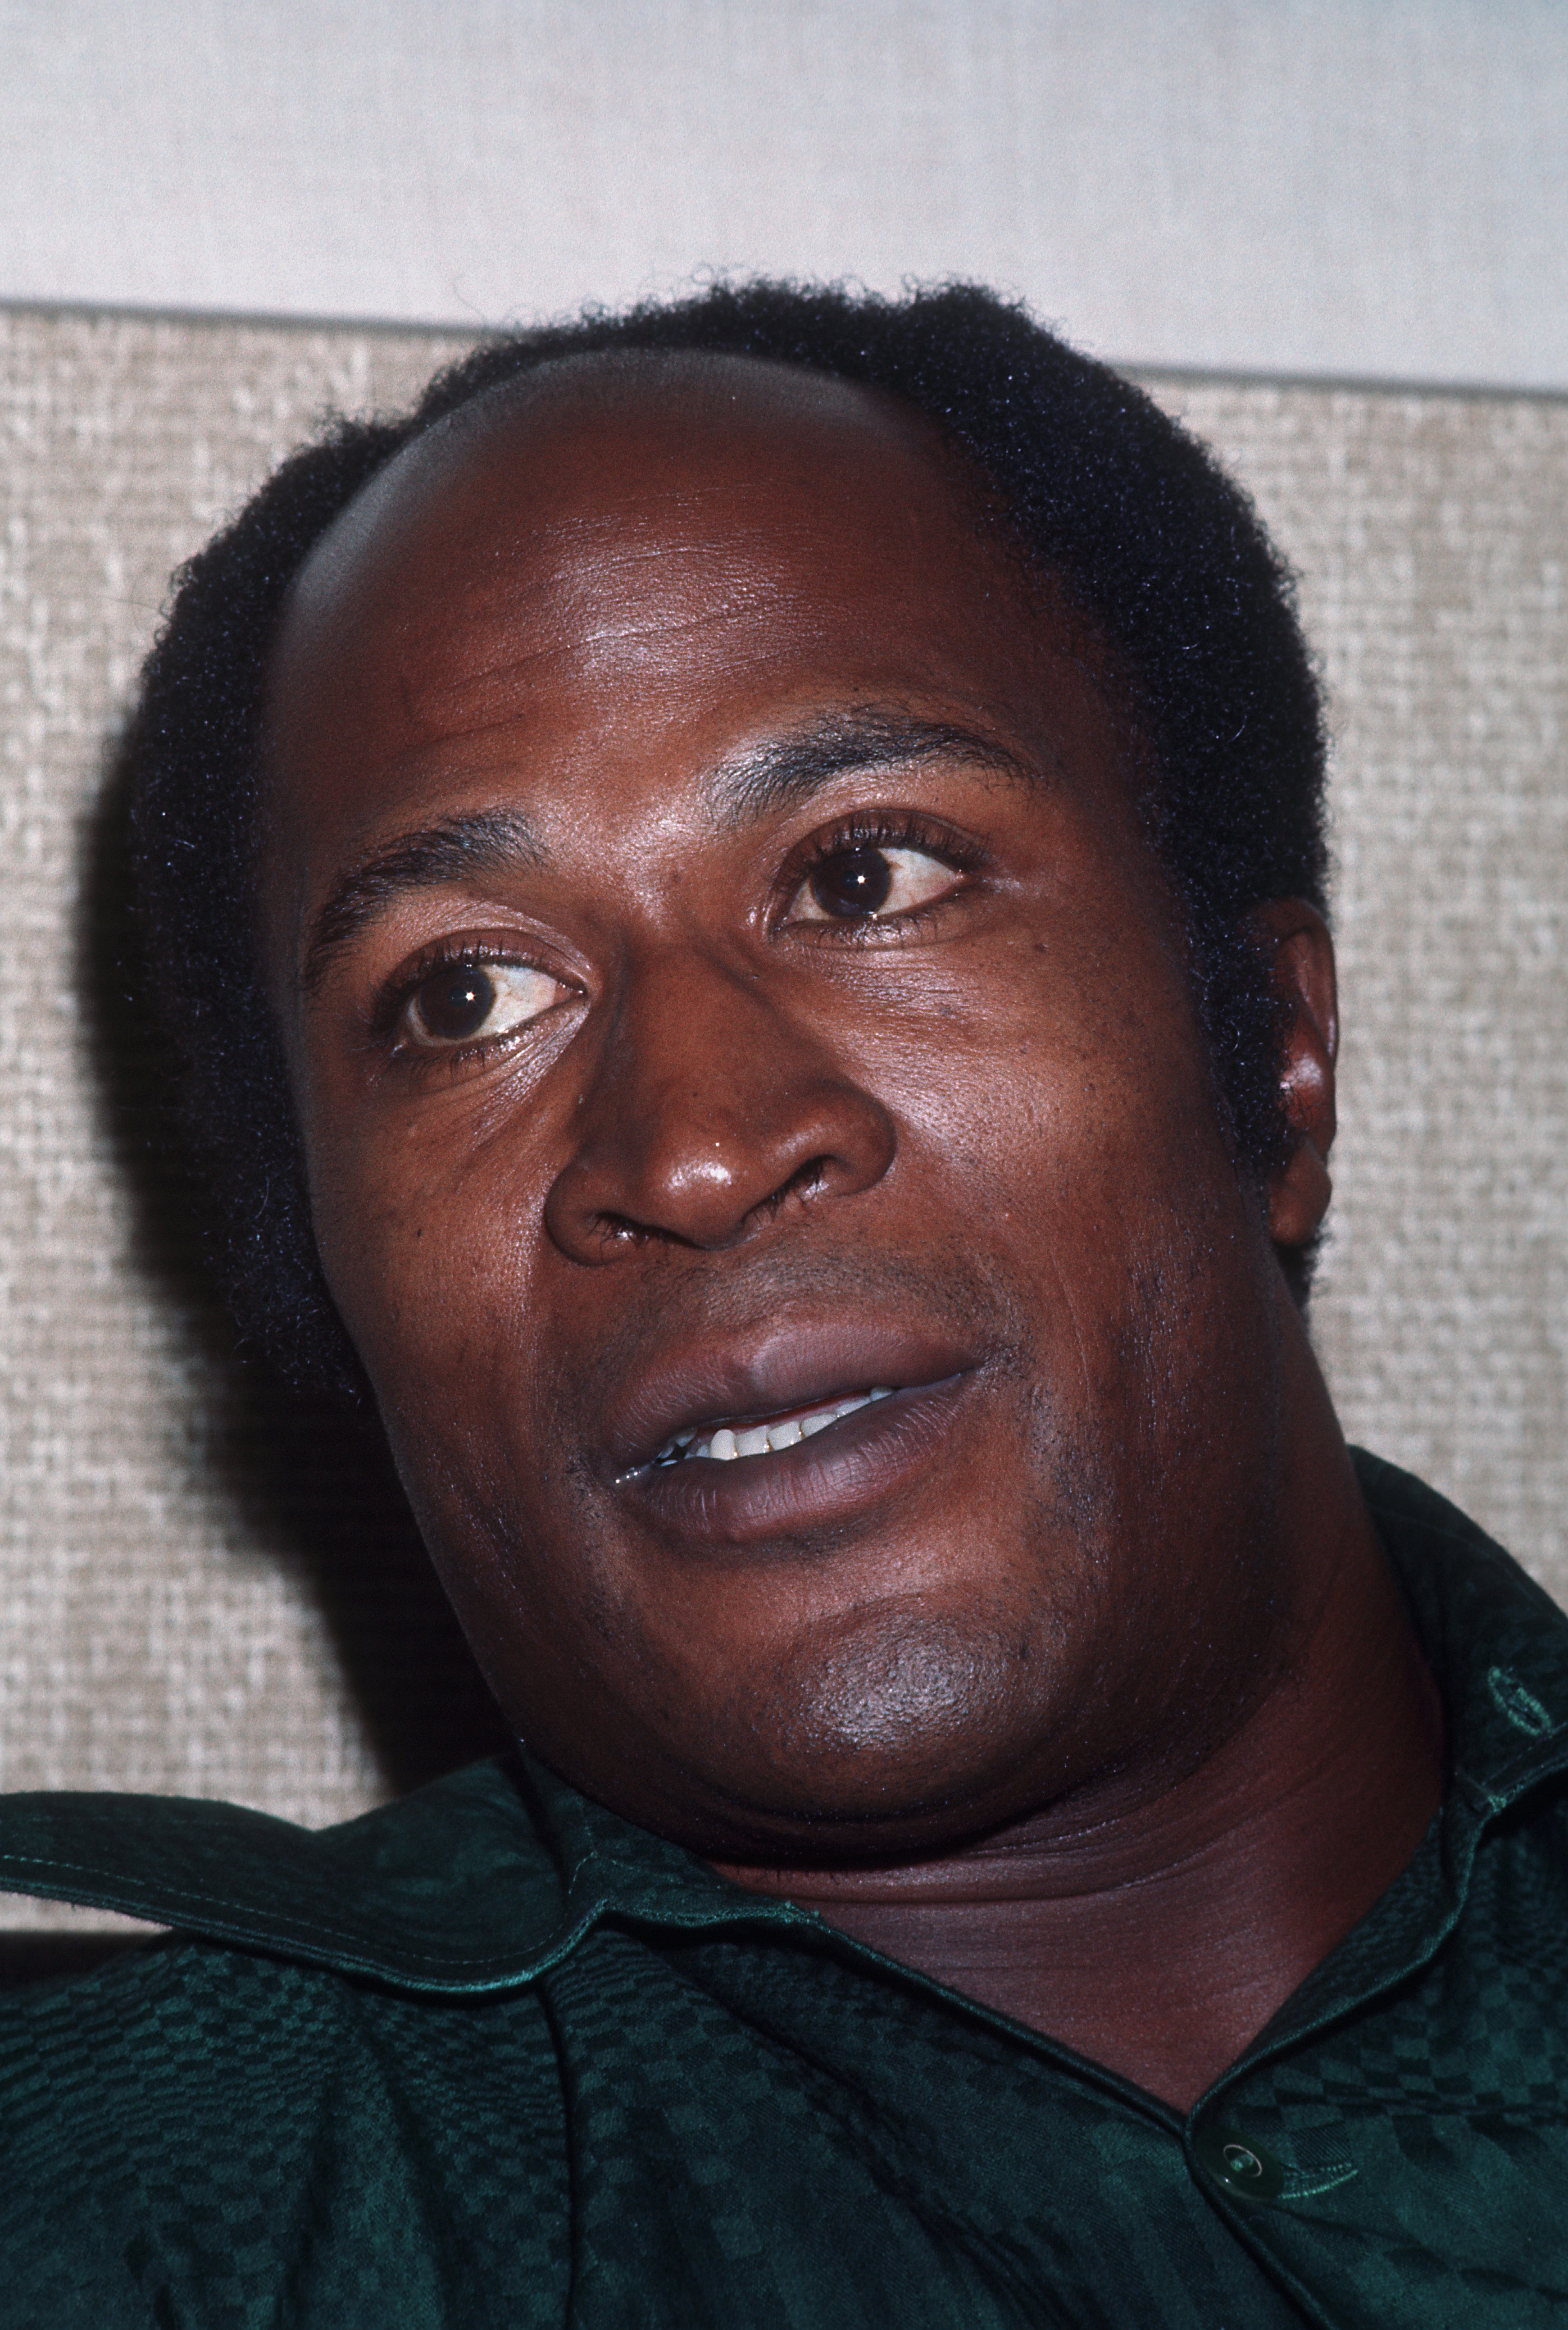 John Amos posing in an image taken in 1975. | Source: Michael Ochs Archives/Getty Images